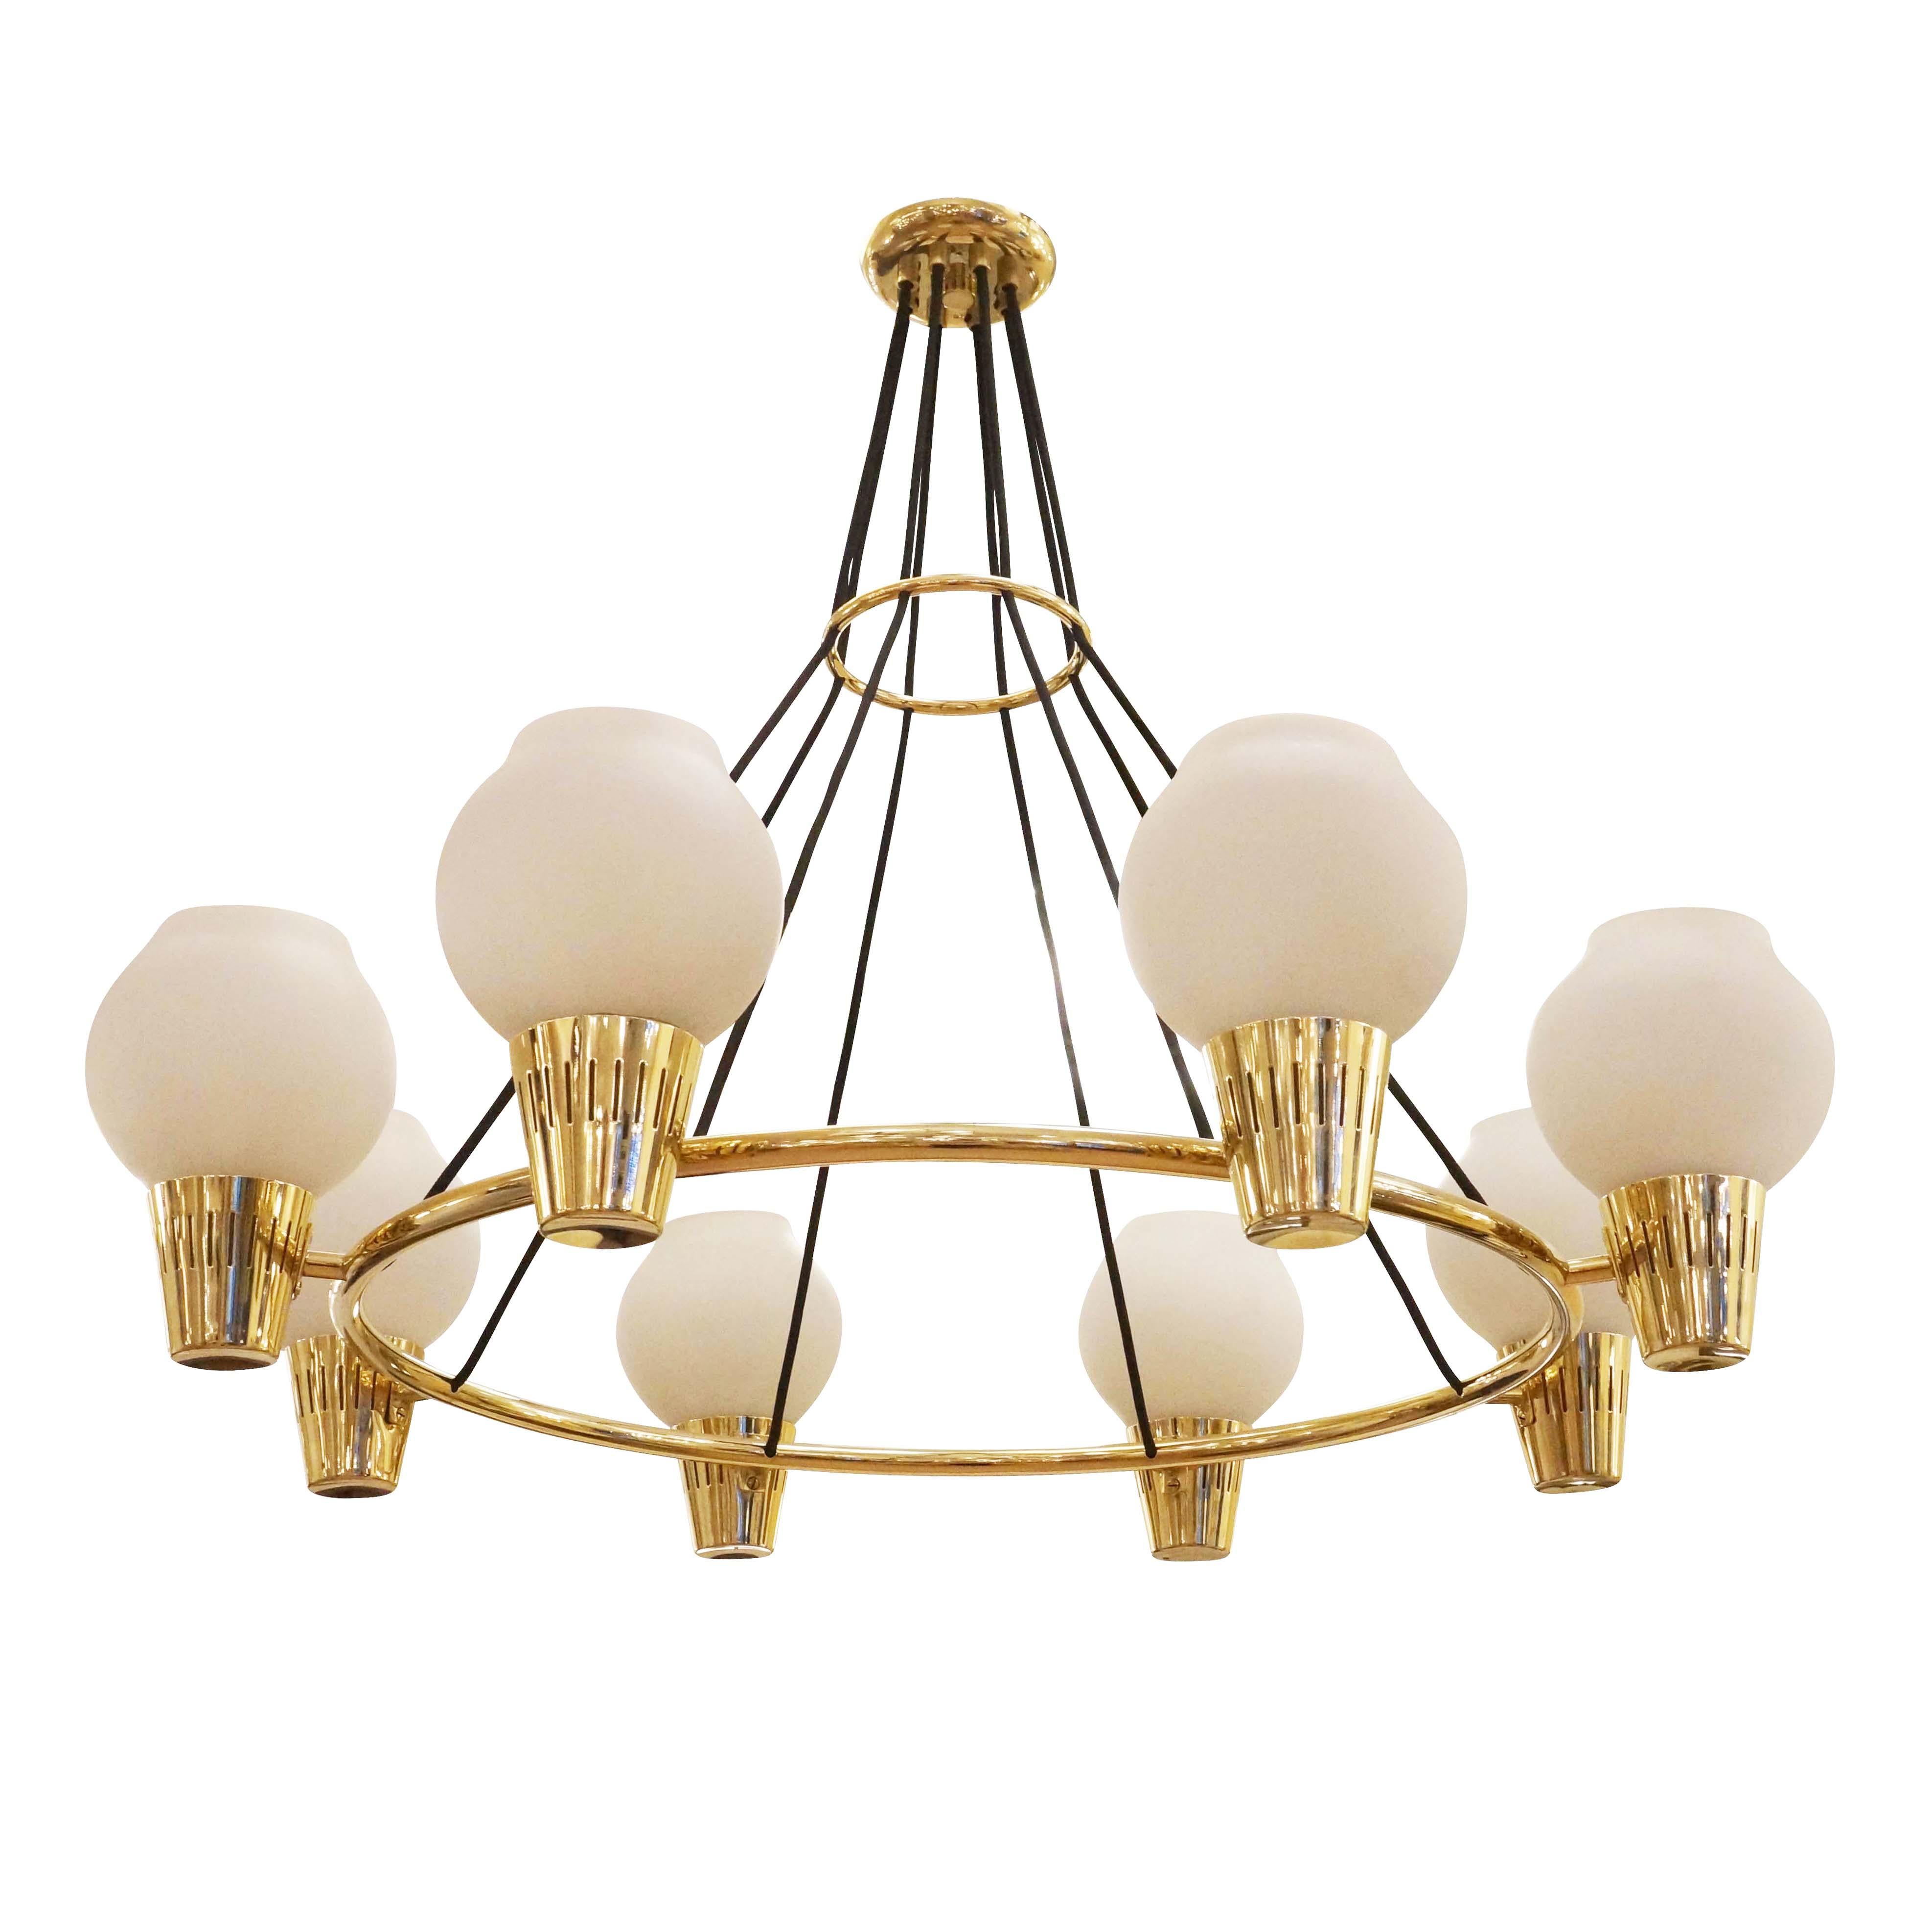 Swedish Mid-Century Modern chandelier designed by Hans Bergstrom for Ystad. Features eight frosted glass diffusers on a polished brass frame. Height is adjustable by altering the cord length.   

Condition: Excellent vintage condition, minor wear